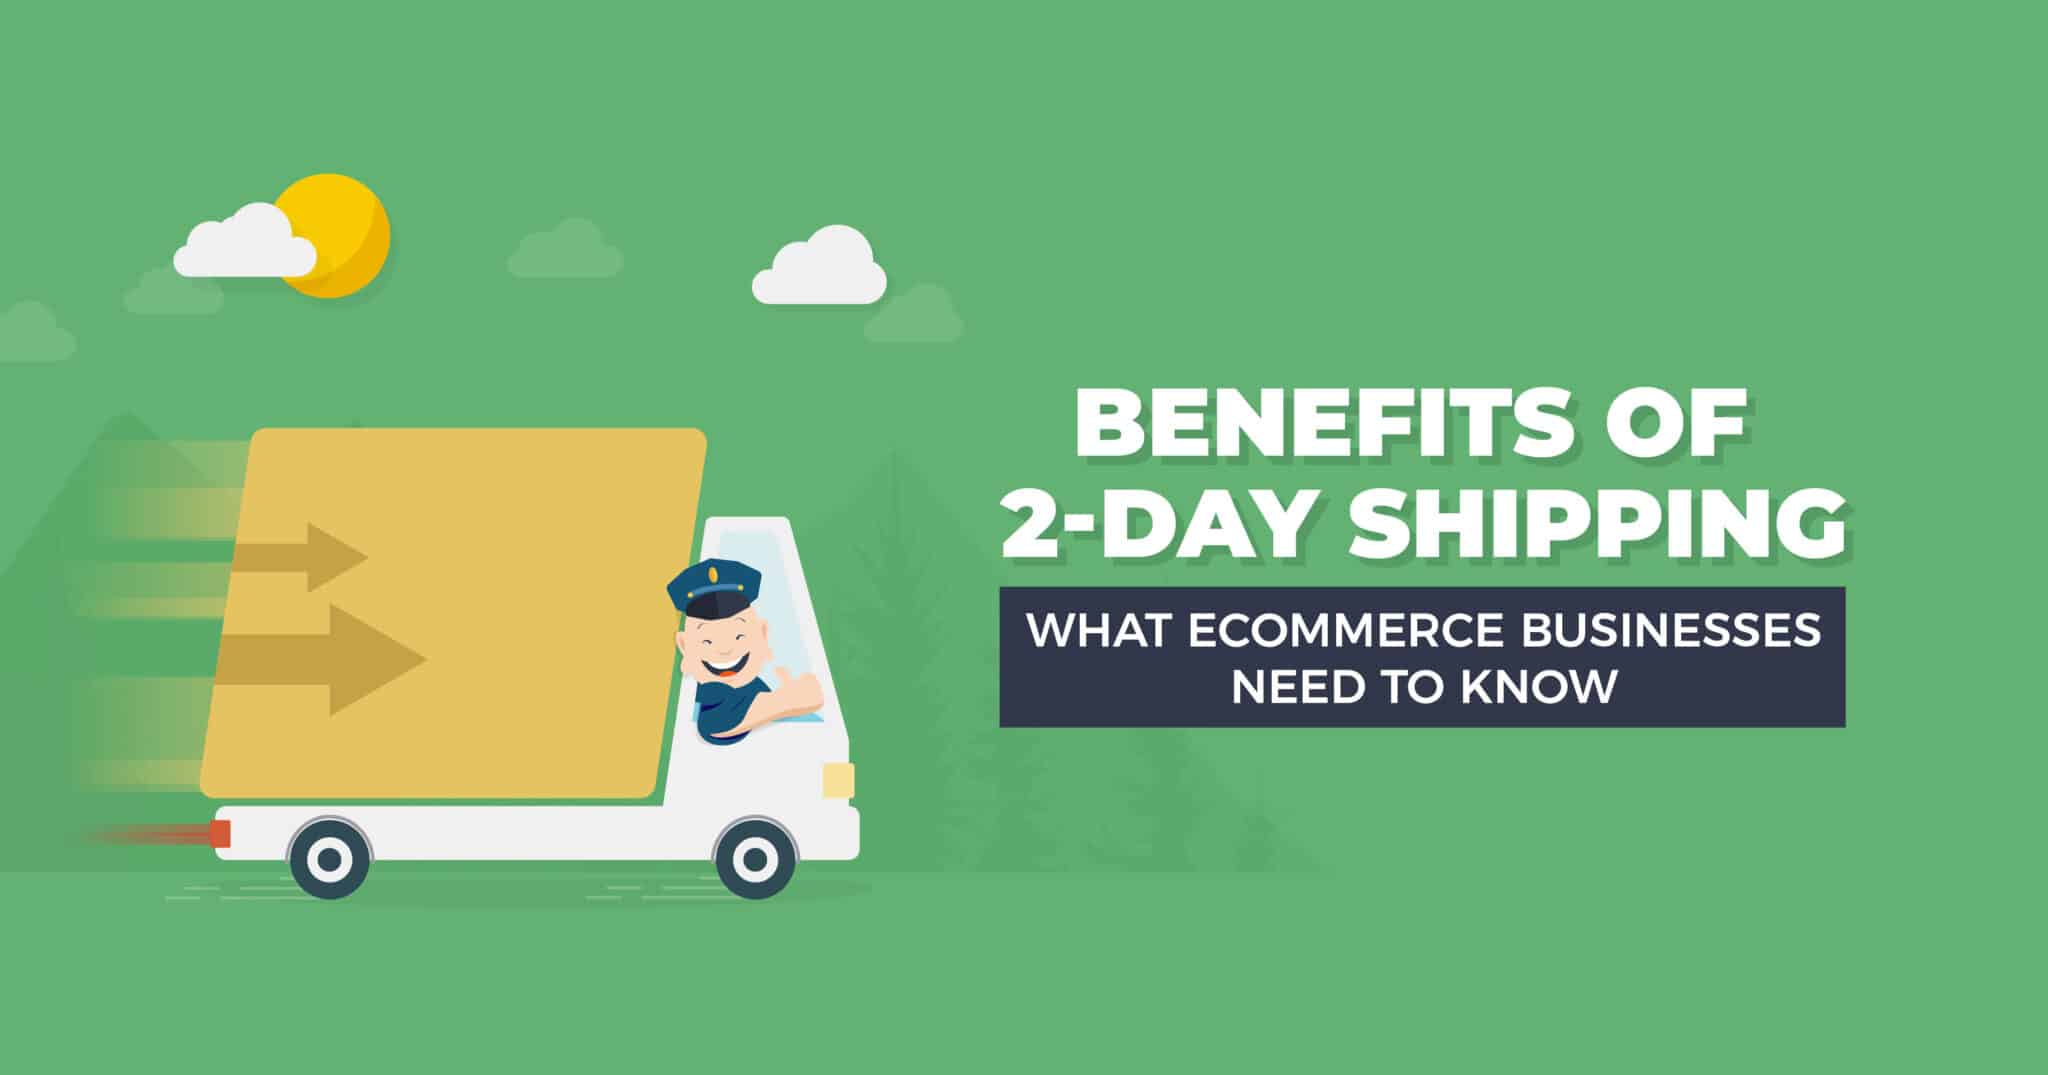 https://www.shipmonk.com/wp-content/uploads/2022/11/Benefits-of-2-Day-Shipping-What-Ecommerce-Businesses-Need-to-Know-blog-scaled.jpg